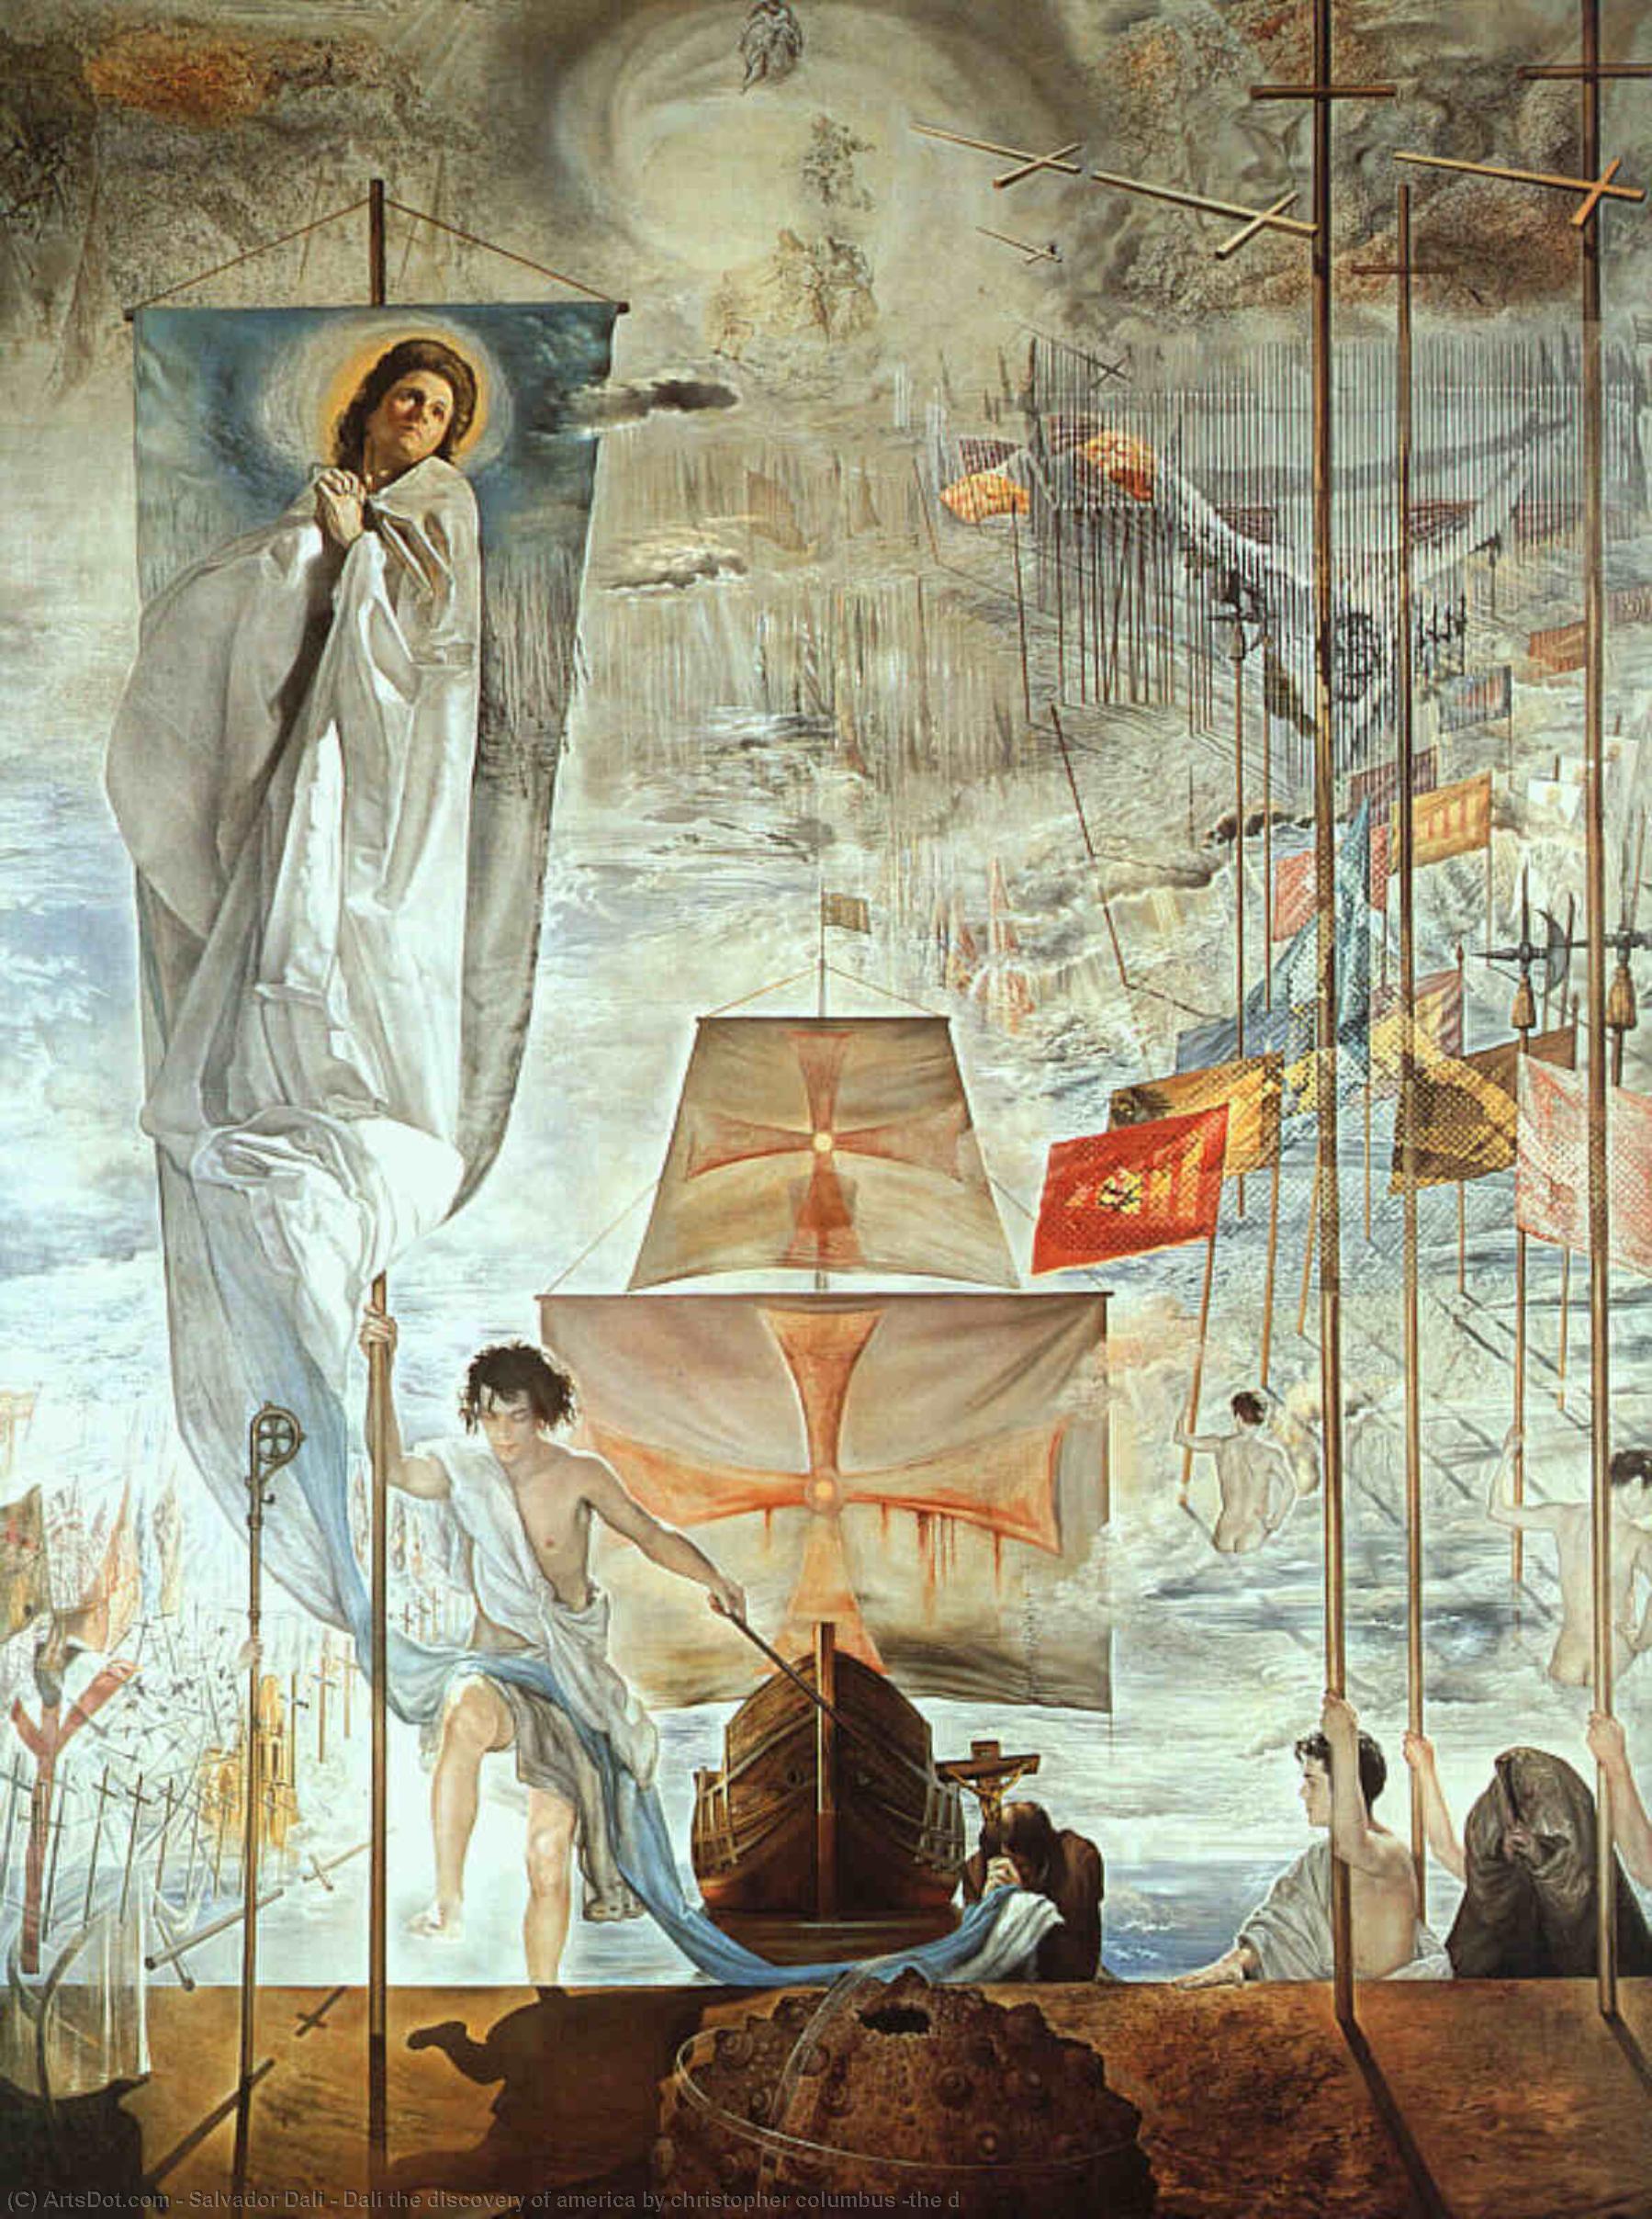 Wikioo.org - สารานุกรมวิจิตรศิลป์ - จิตรกรรม Salvador Dali - Dalí the discovery of america by christopher columbus (the d